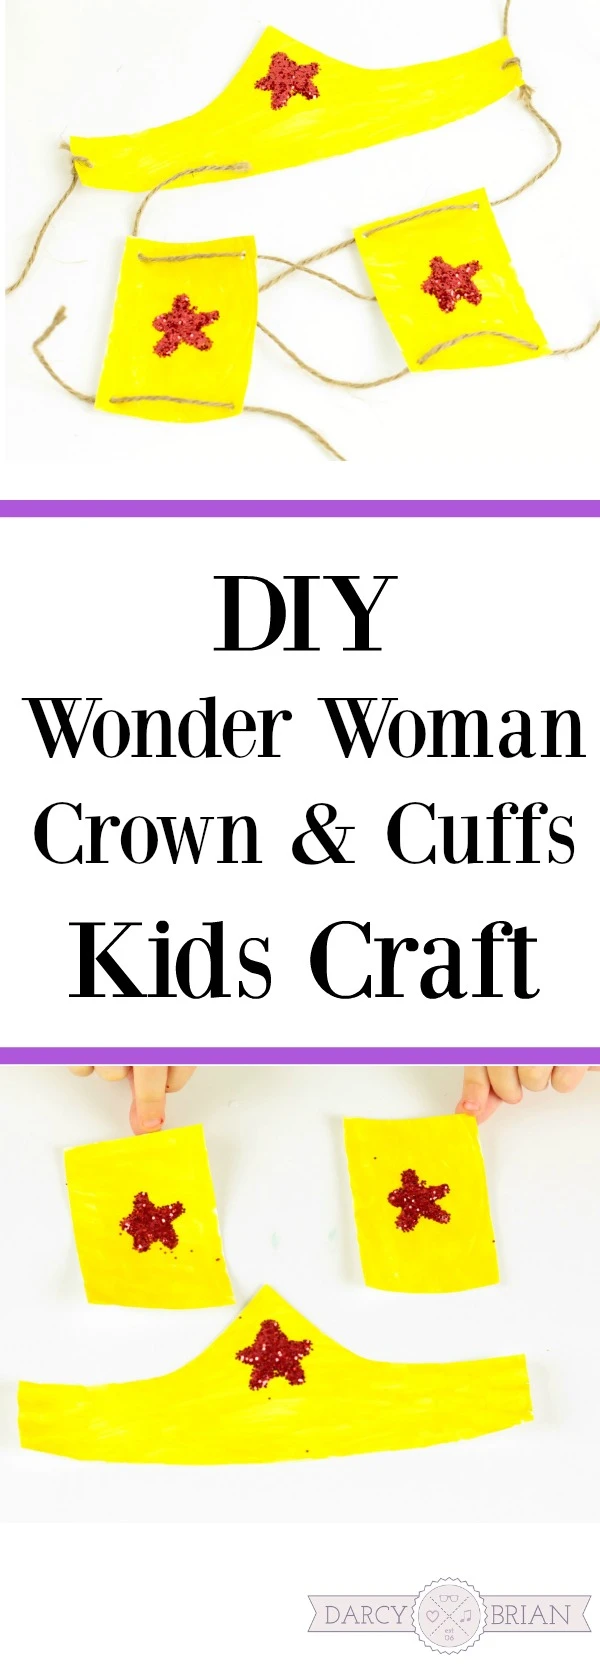 Super fun kids craft! Make your own DIY Wonder Woman Crown and Cuffs using this simple to follow paper plate craft tutorial! This easy Costume idea is perfect for dress up and pretend play, a superhero birthday party, or even Halloween!